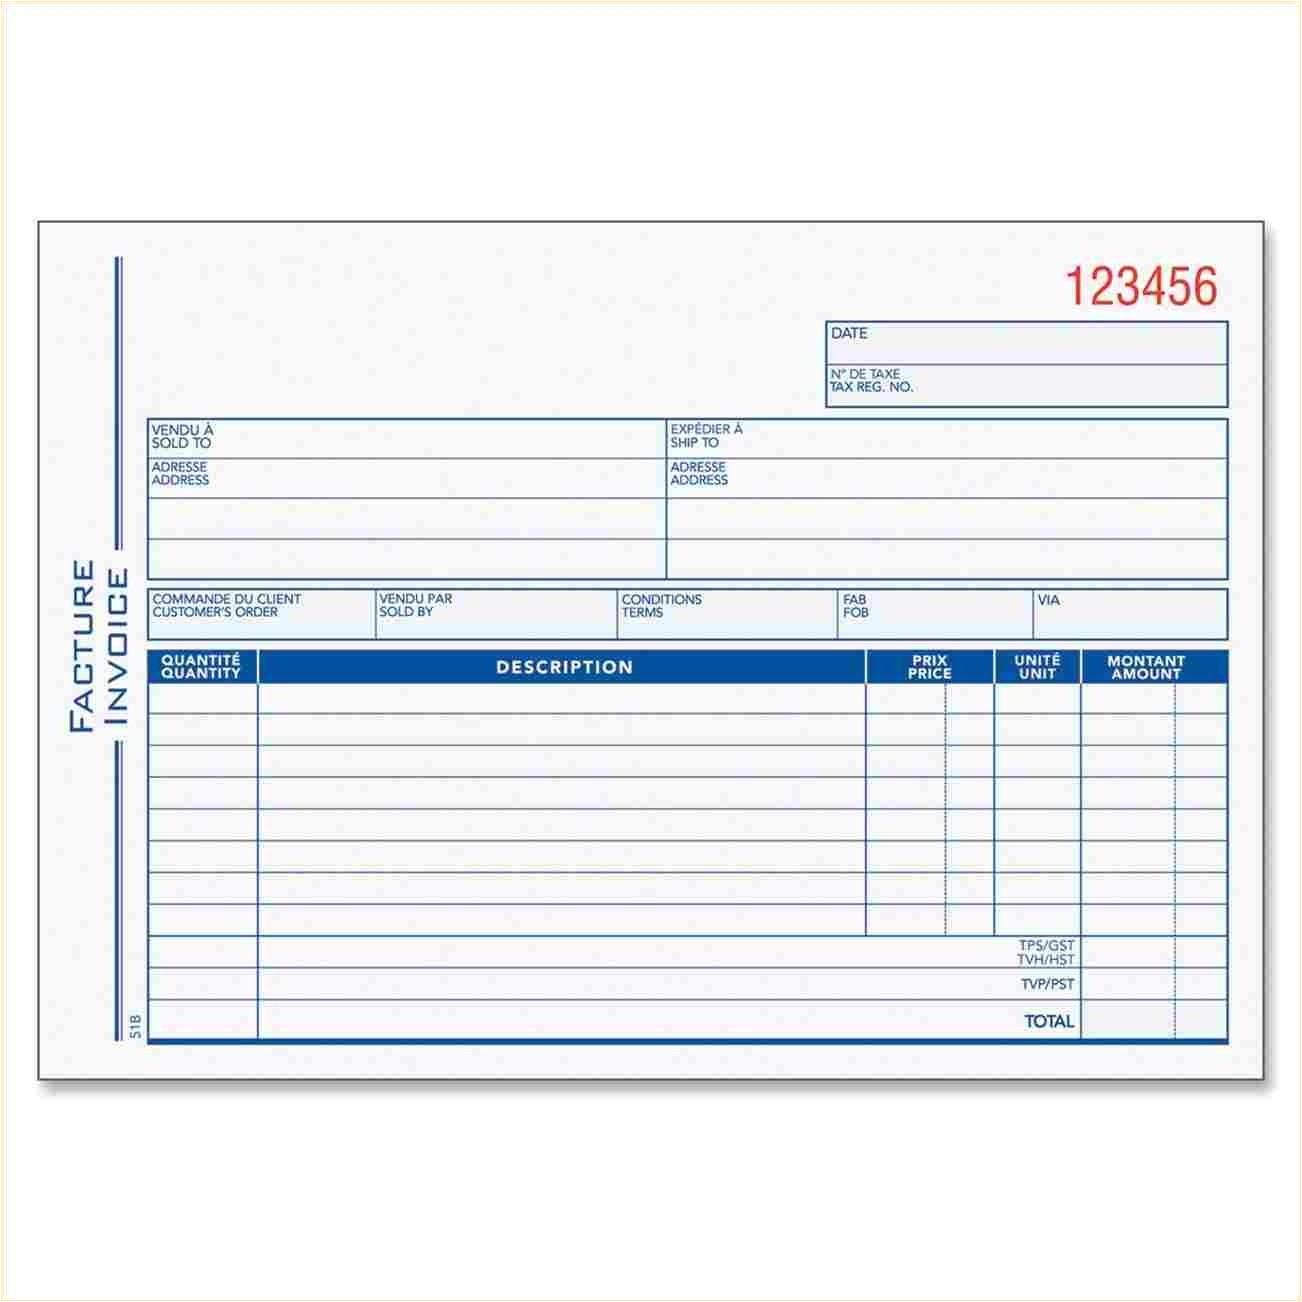 adams invoice forms residers 3